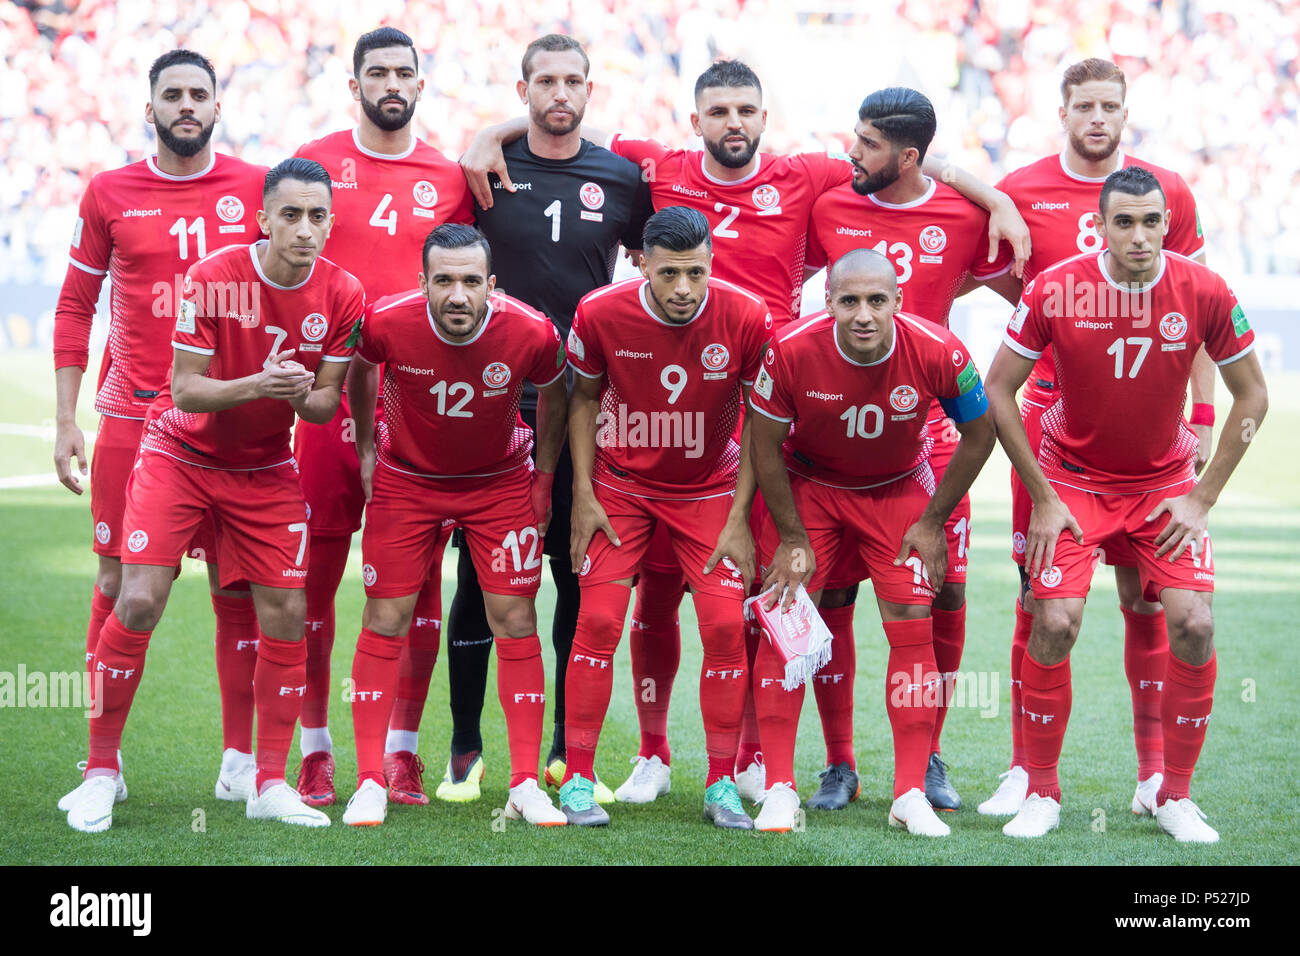 Moscow, Russia. 23rd June, 2018. The Tunisian players are available for the team photo, Dylan BRONN (DO), Yassine MERIAH (DO), goalkeeper Farouk BEN MUSTAPHA (DO), Syam BEN YOUSSEF (DO), Ferjani SASSI (DO), Rami BEDOUI (DO), uRleft to right Saifeddine KHAOUI (DO), Ali MAALOUL (DO), Anice BADRI (DO), Wahbi KHAZRI (DO), Ellyes SKHIRI (DO), Full Character, Landscape, Team Photo, Group Image, Belgium (BEL) - Tunisia (TUN) 5: 2, preliminary round, group G, game 29, on 23.06.2018 in Moscow; Football World Cup 2018 in Russia from 14.06. - 15.07.2018. | usage worldwide Credit: dpa/Alamy Live News Stock Photo